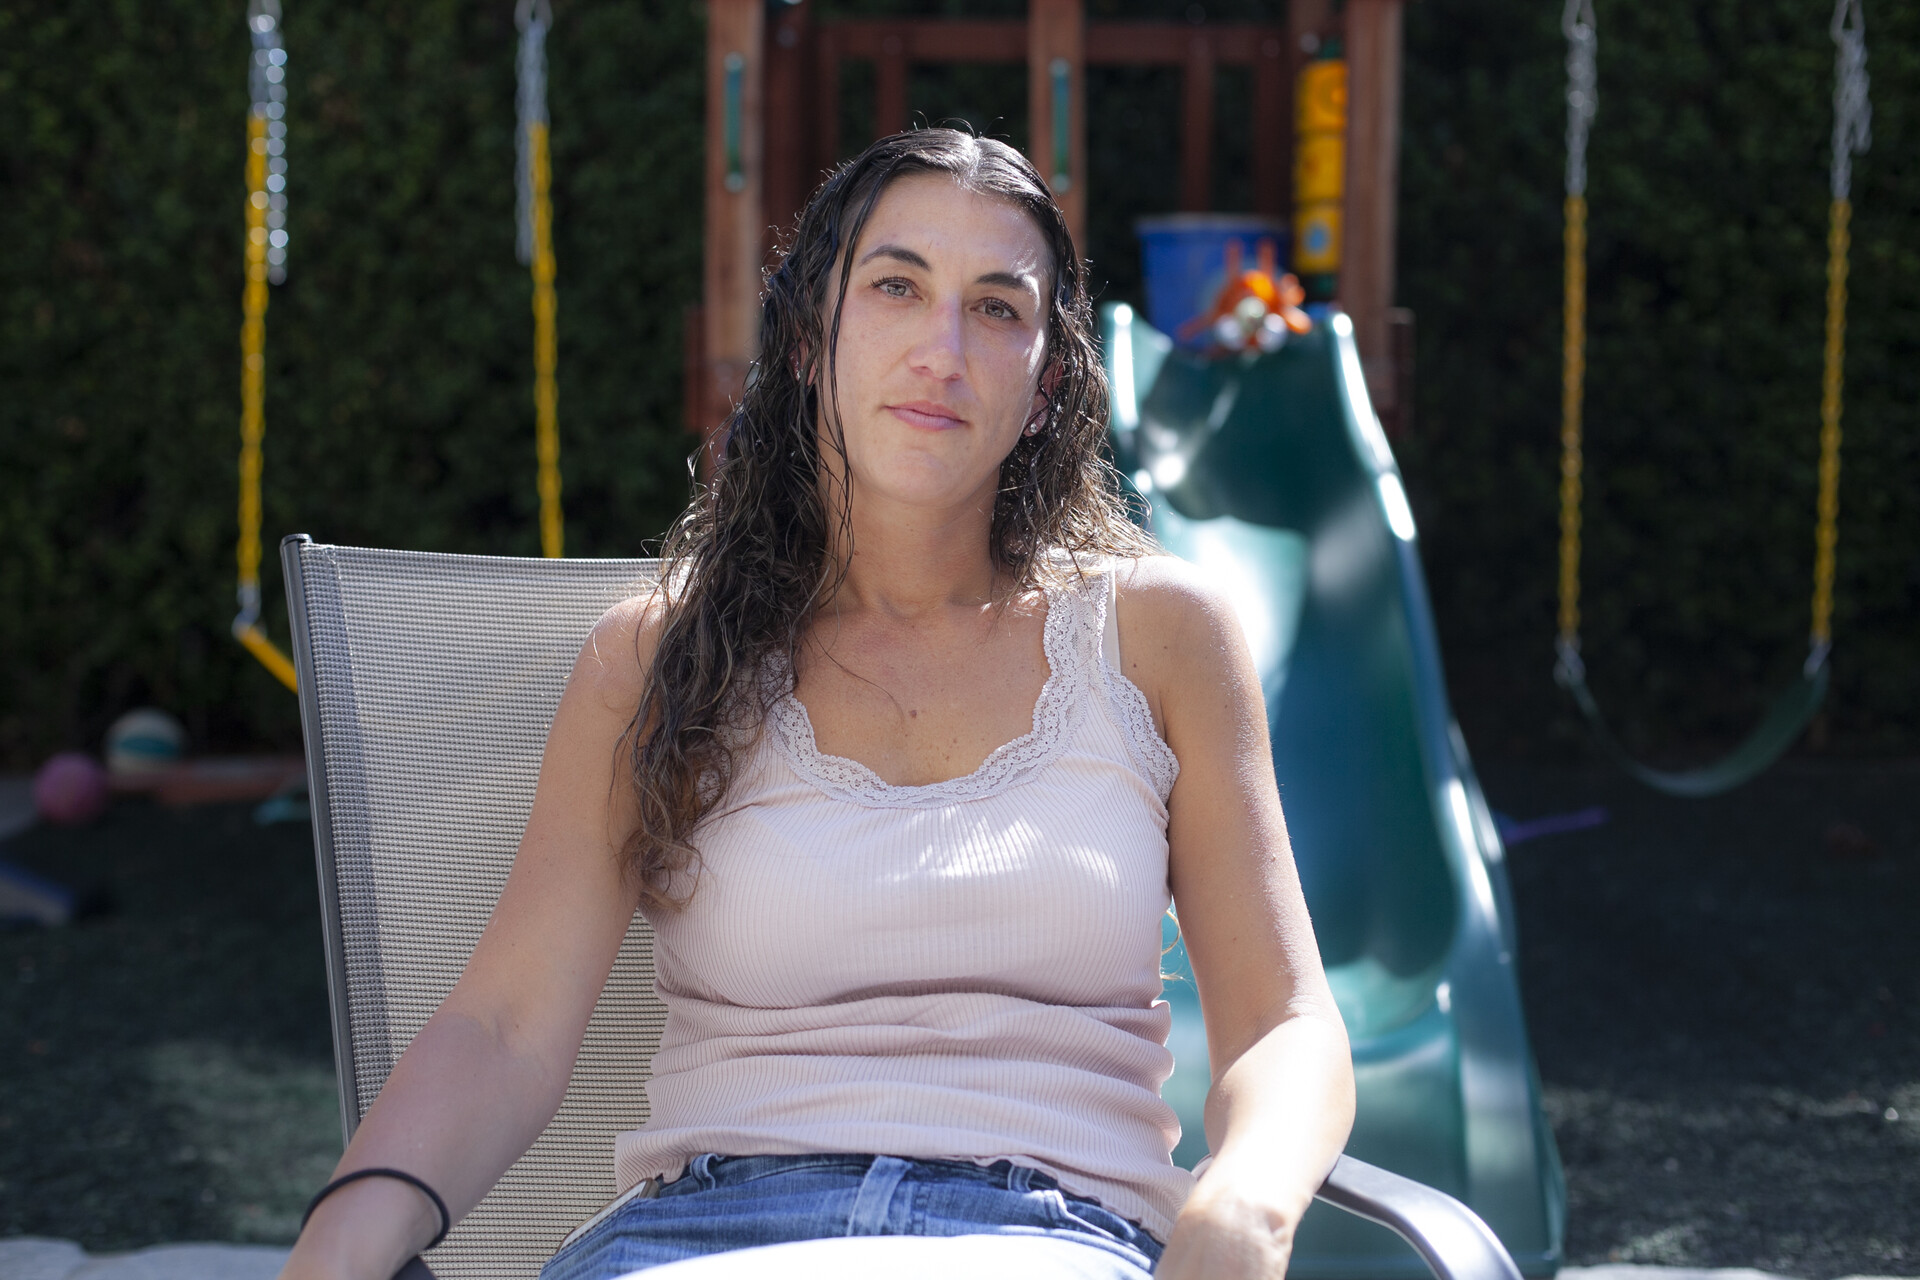 A woman wearing a light tank top shirt and blue jeans sits in a chair outside.